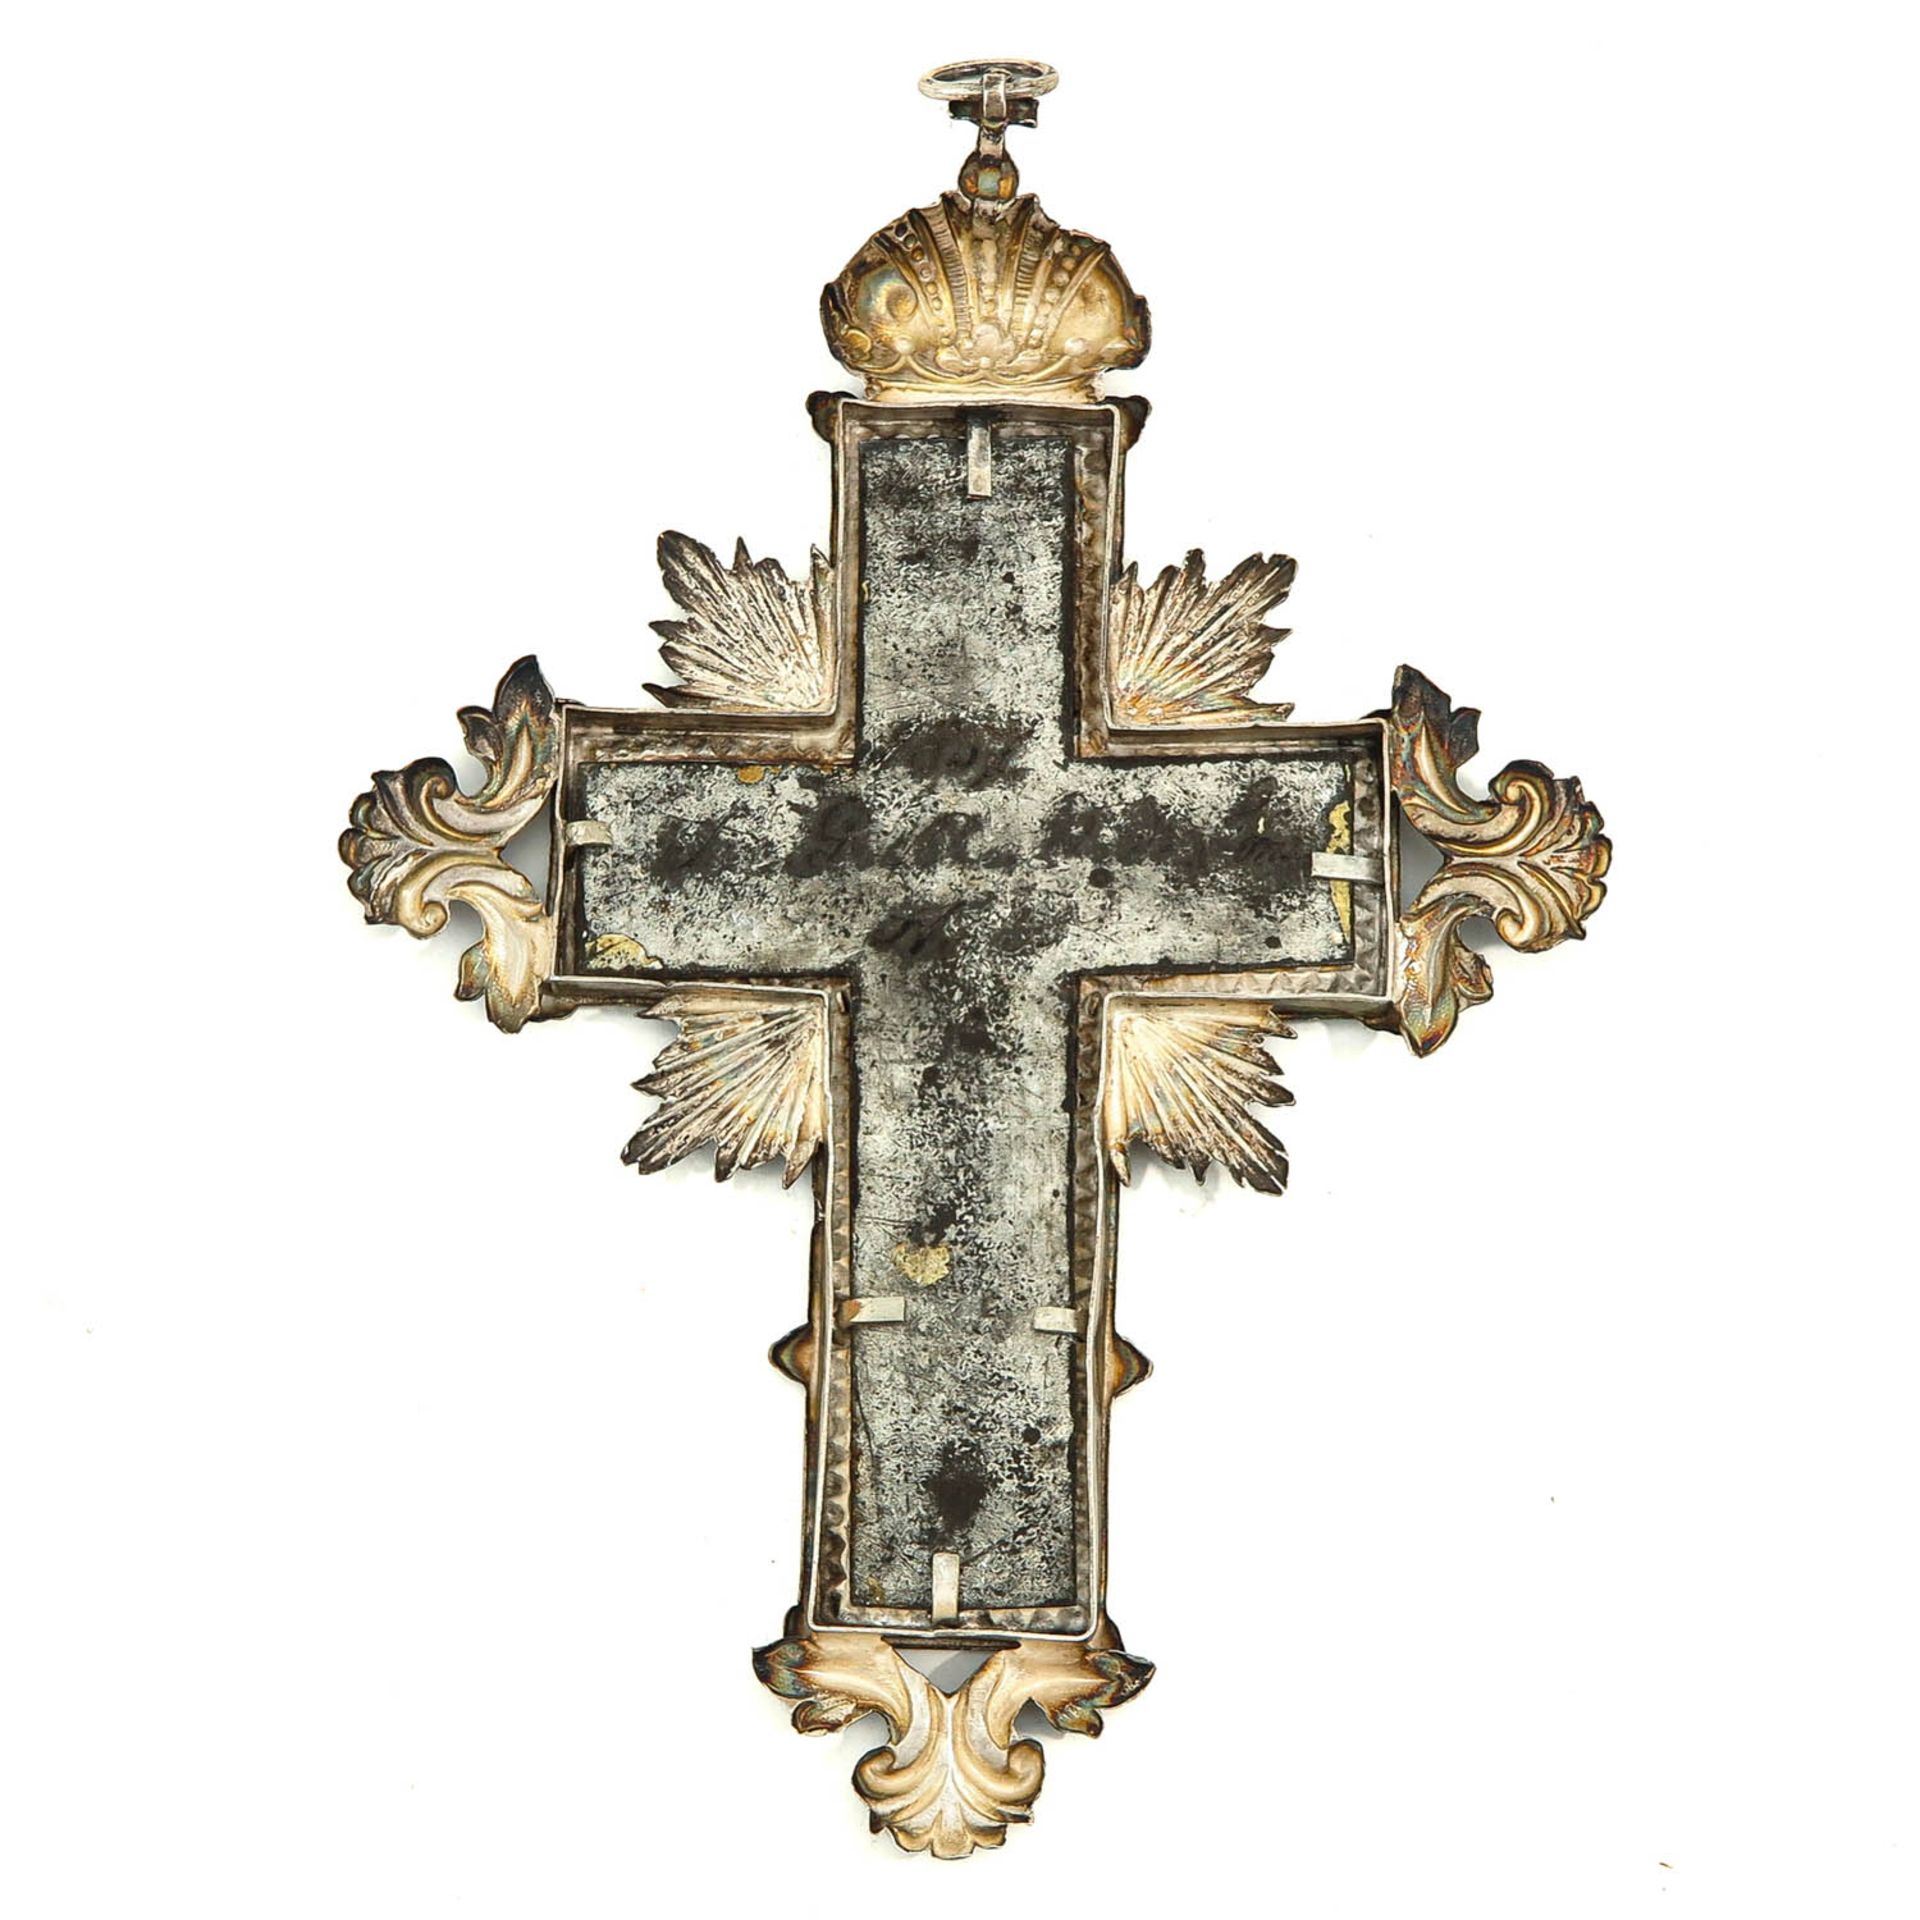 A Silver Cross Pedant with 6 Miniature Paintings - Image 2 of 4